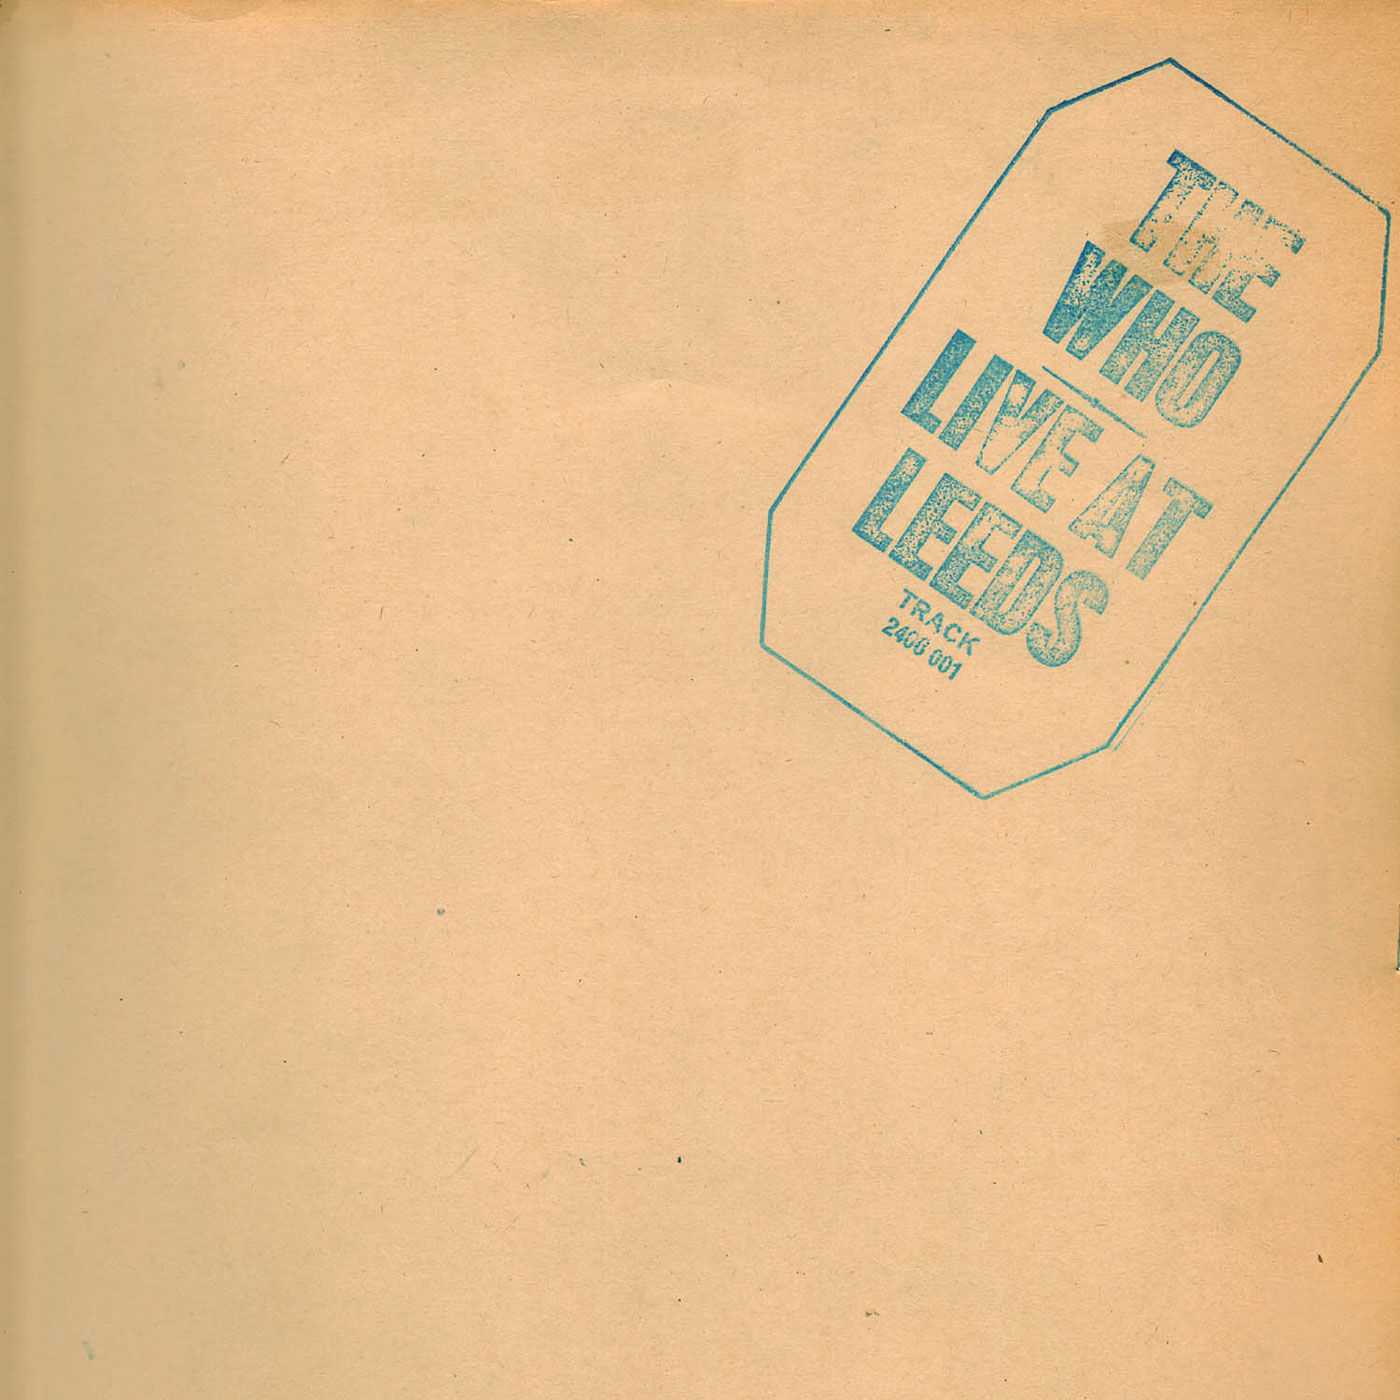 193 The Who – Live at Leeds